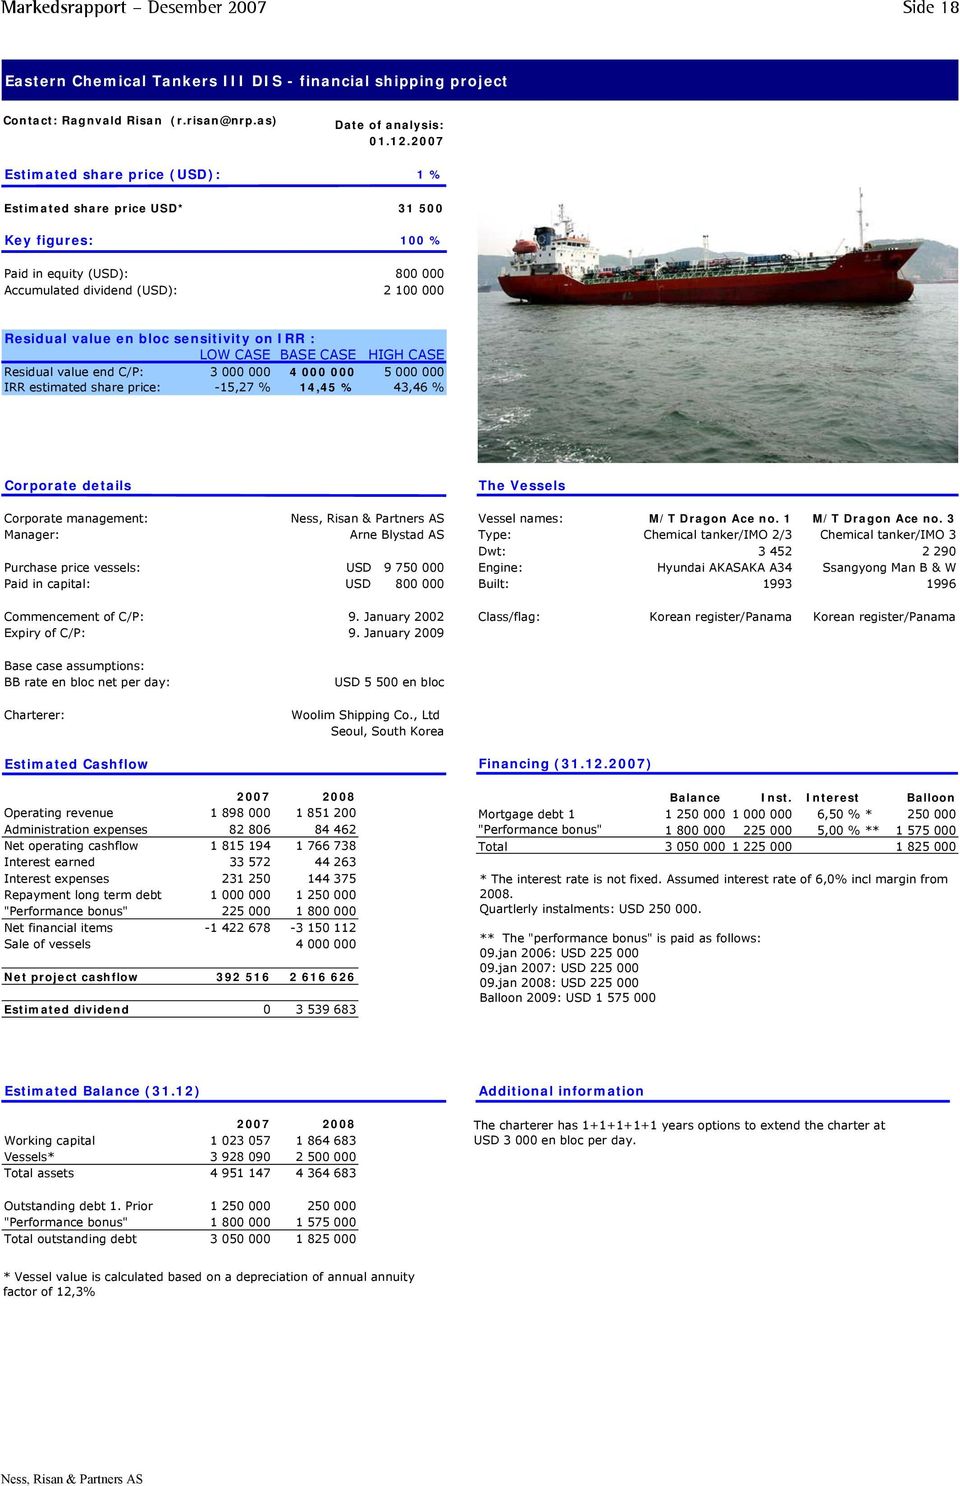 sensitivity on IRR : LOW CASE BASE CASE HIGH CASE Residual value end C/P: 3 000 000 4 000 000 5 000 000 IRR estimated share price: -15,27 % 14,45 % 43,46 % Corporate details The Vessels Corporate